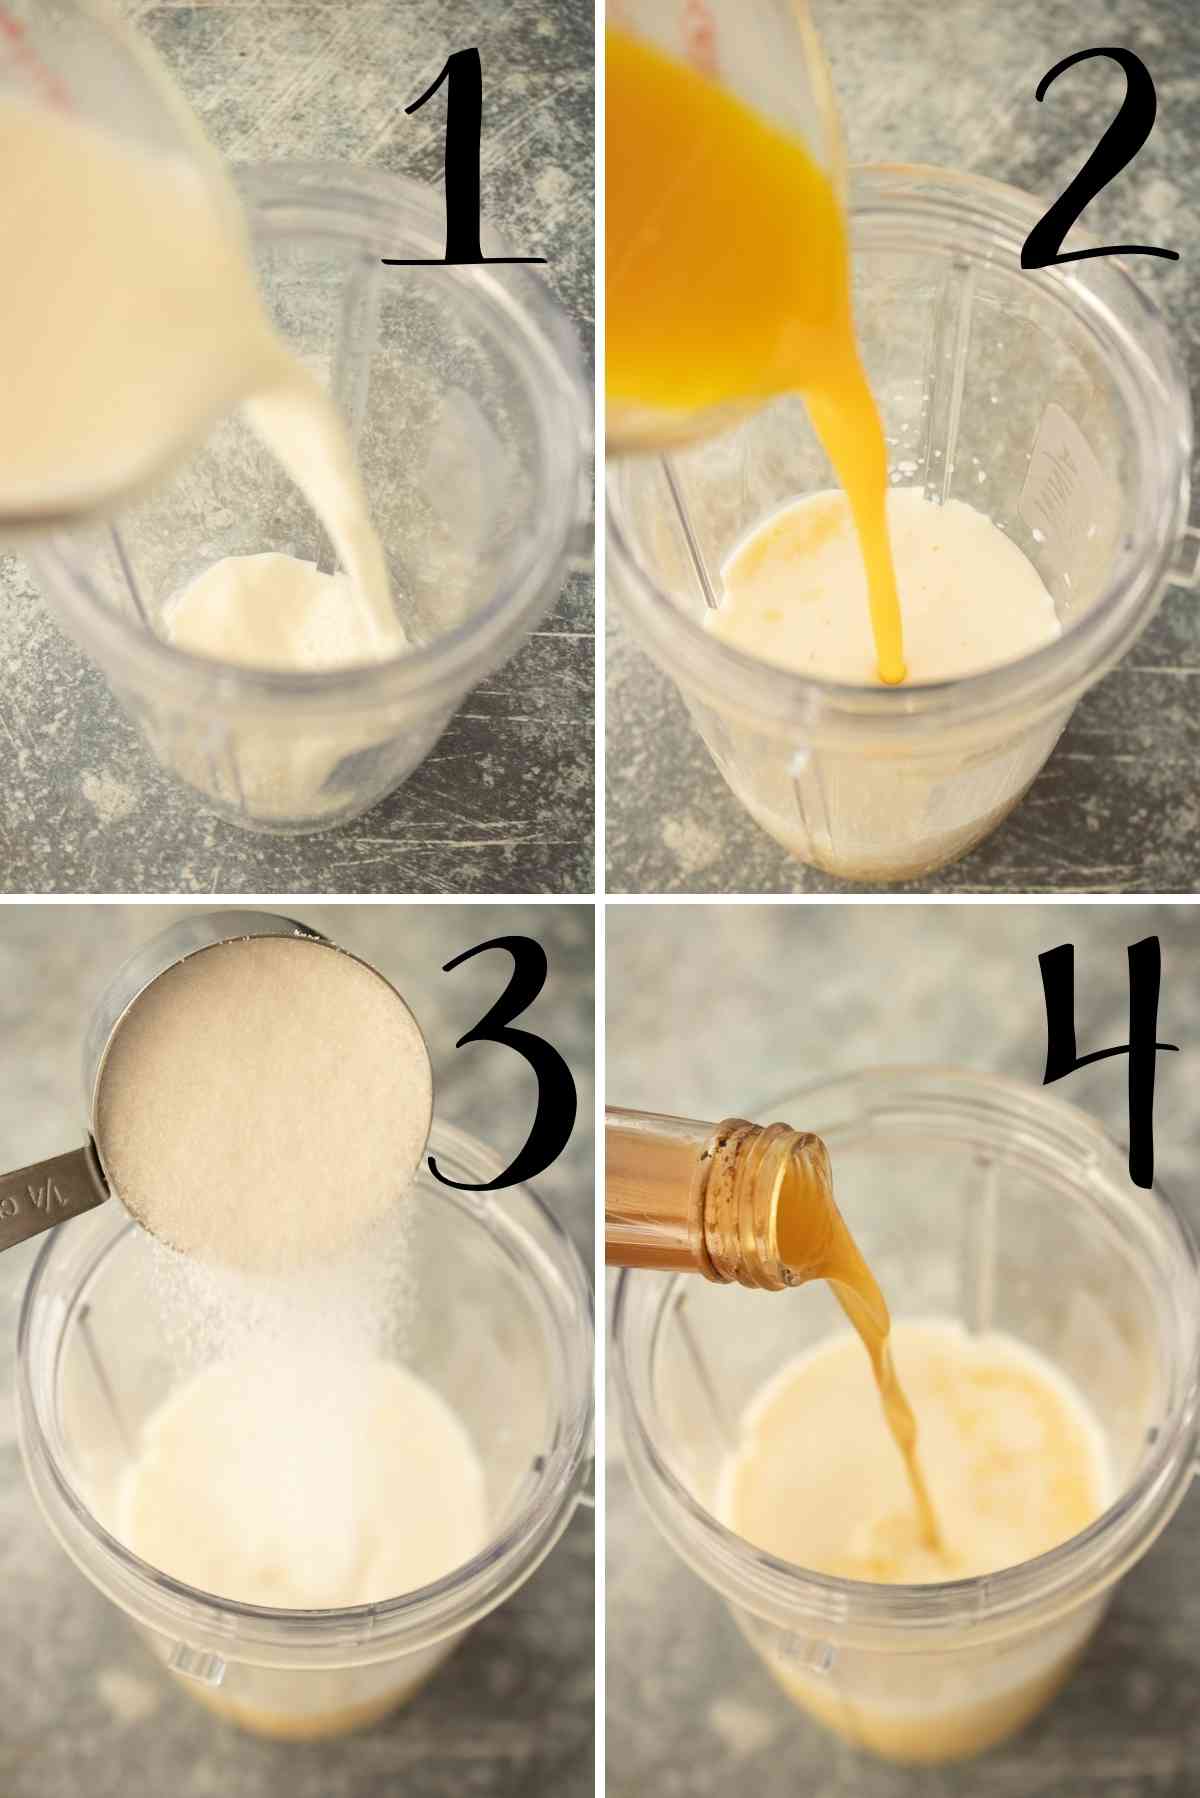 Milk, orange juice concentrate, sugar and vanilla added to a blender cup.